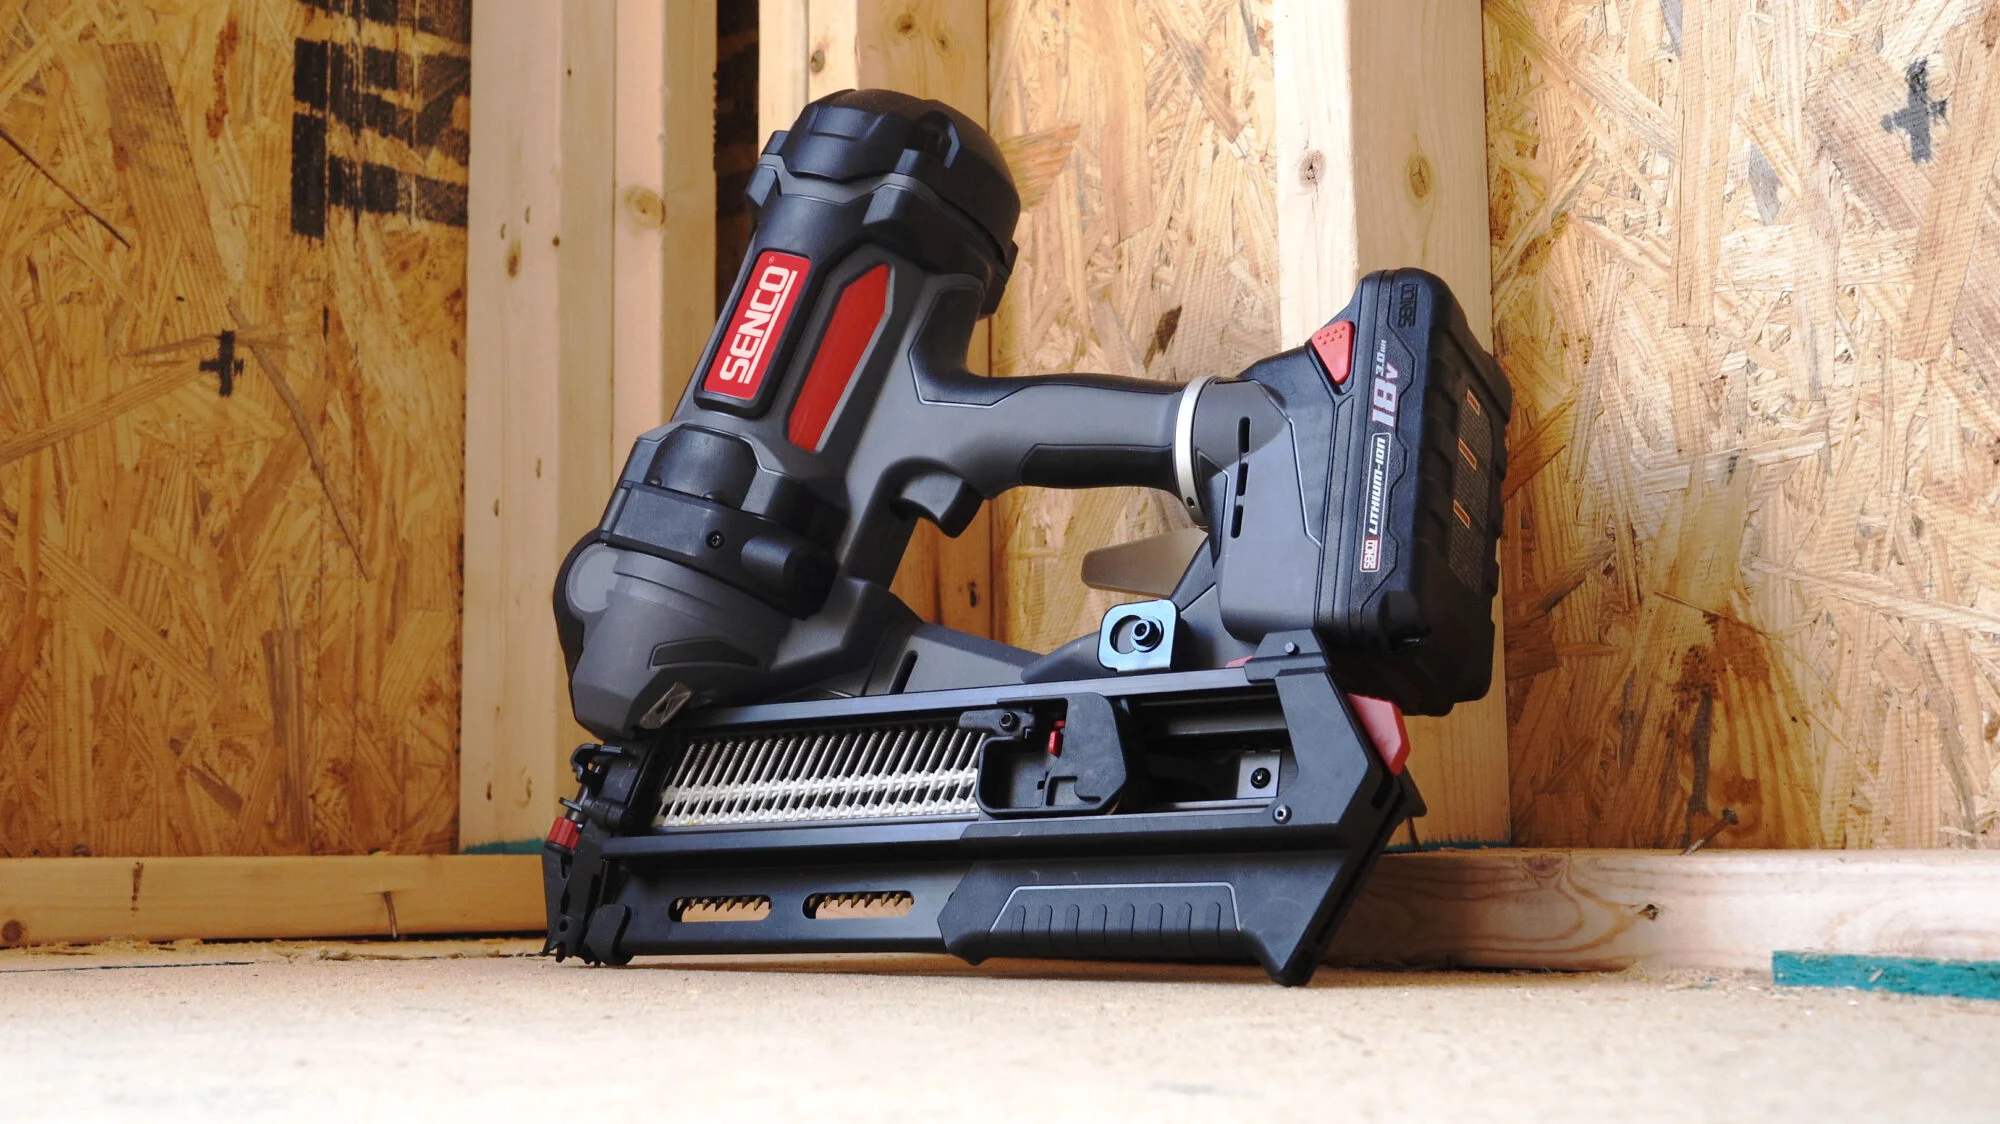 SENCO Expands Cordless Framing Nailer Line with New Full Round Head Model